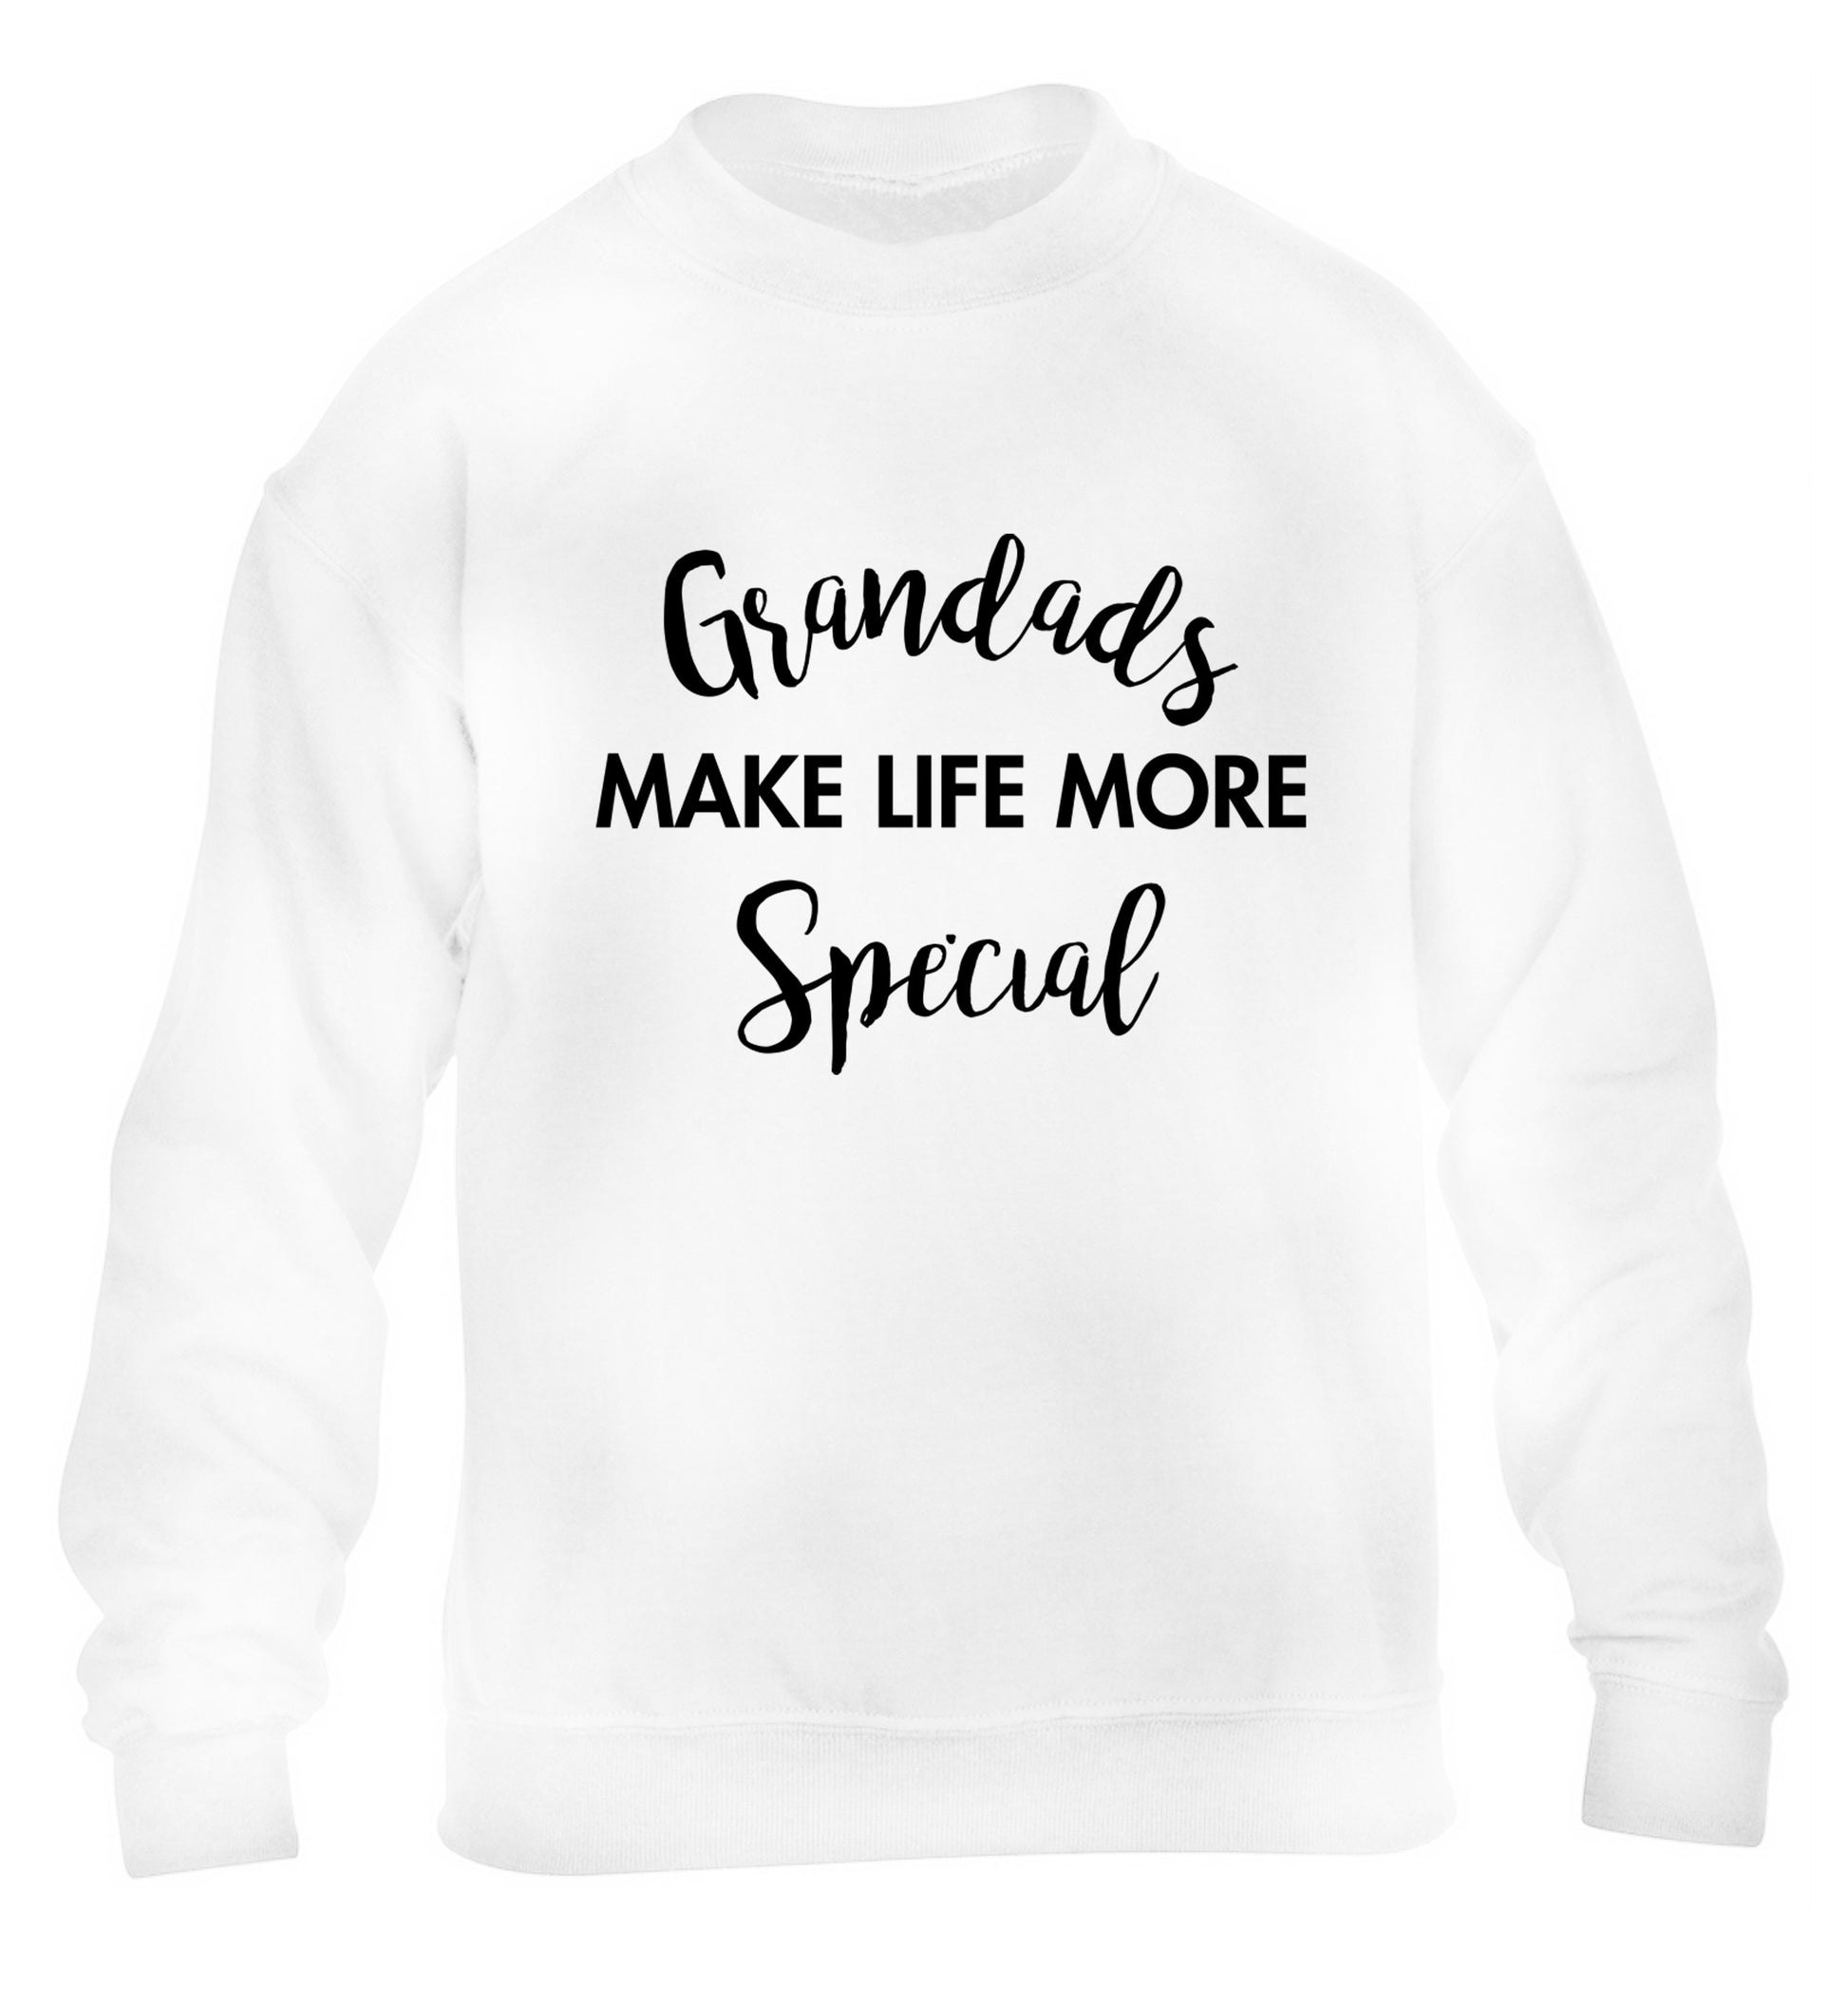 Grandads make life more special children's white sweater 12-14 Years